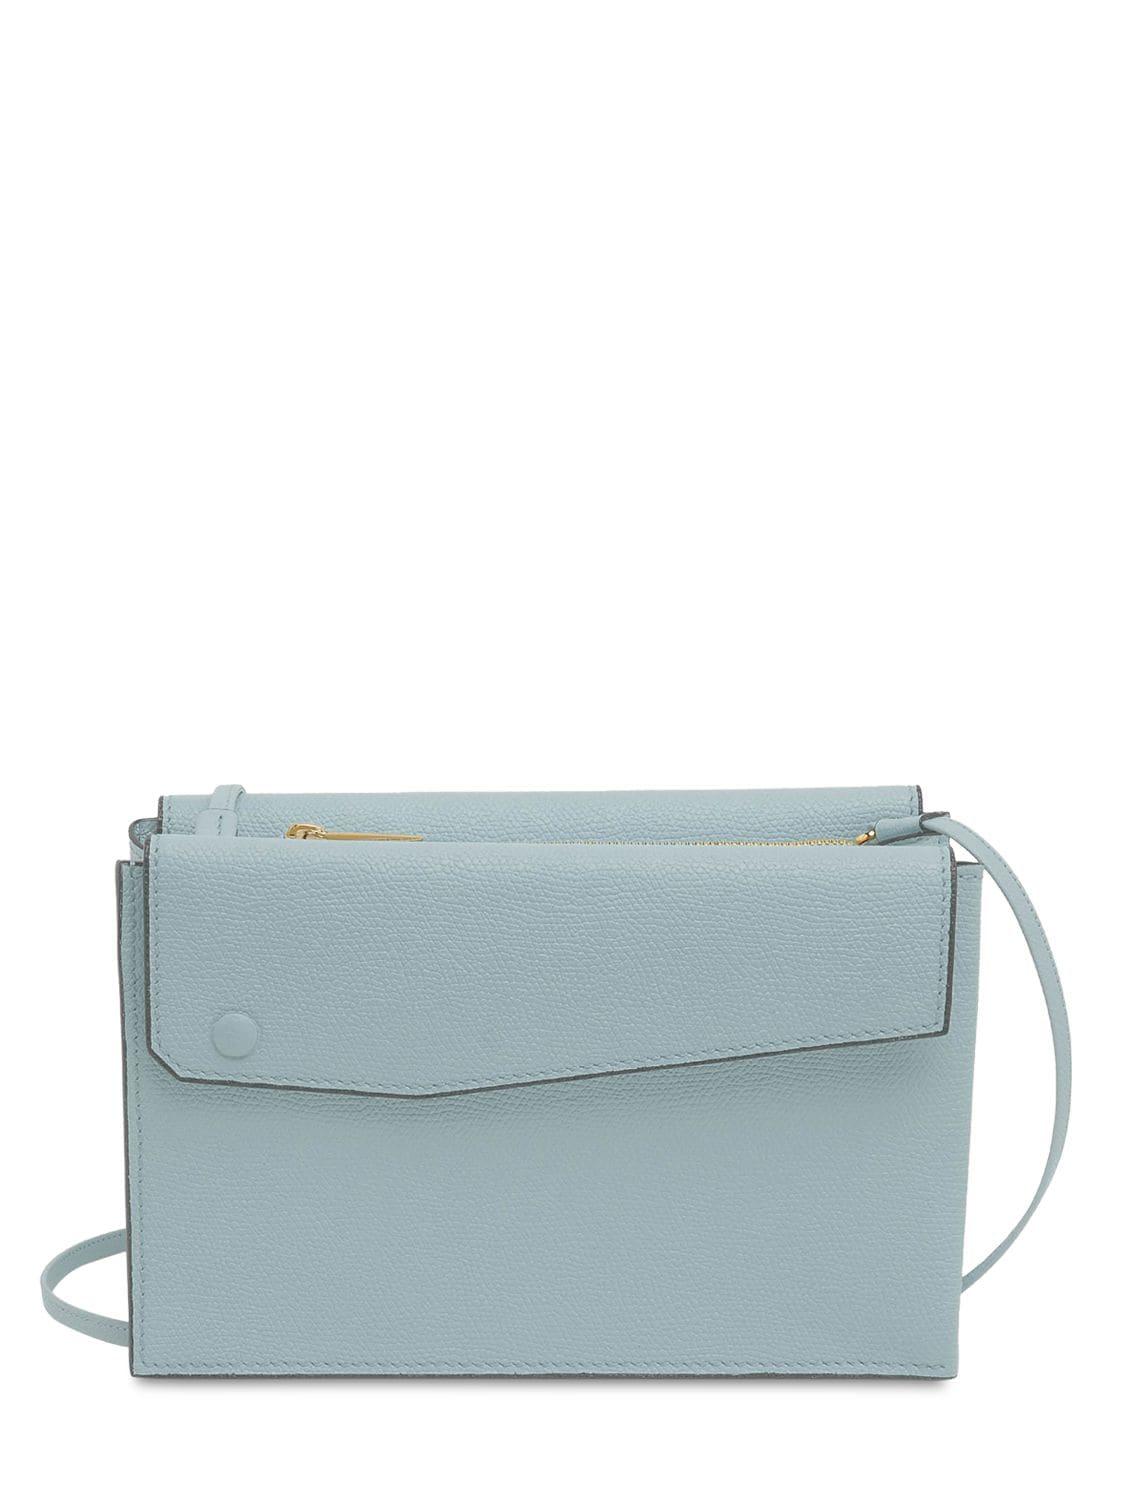 Valextra Trio Grained Leather Crossbody Bag In Polvere